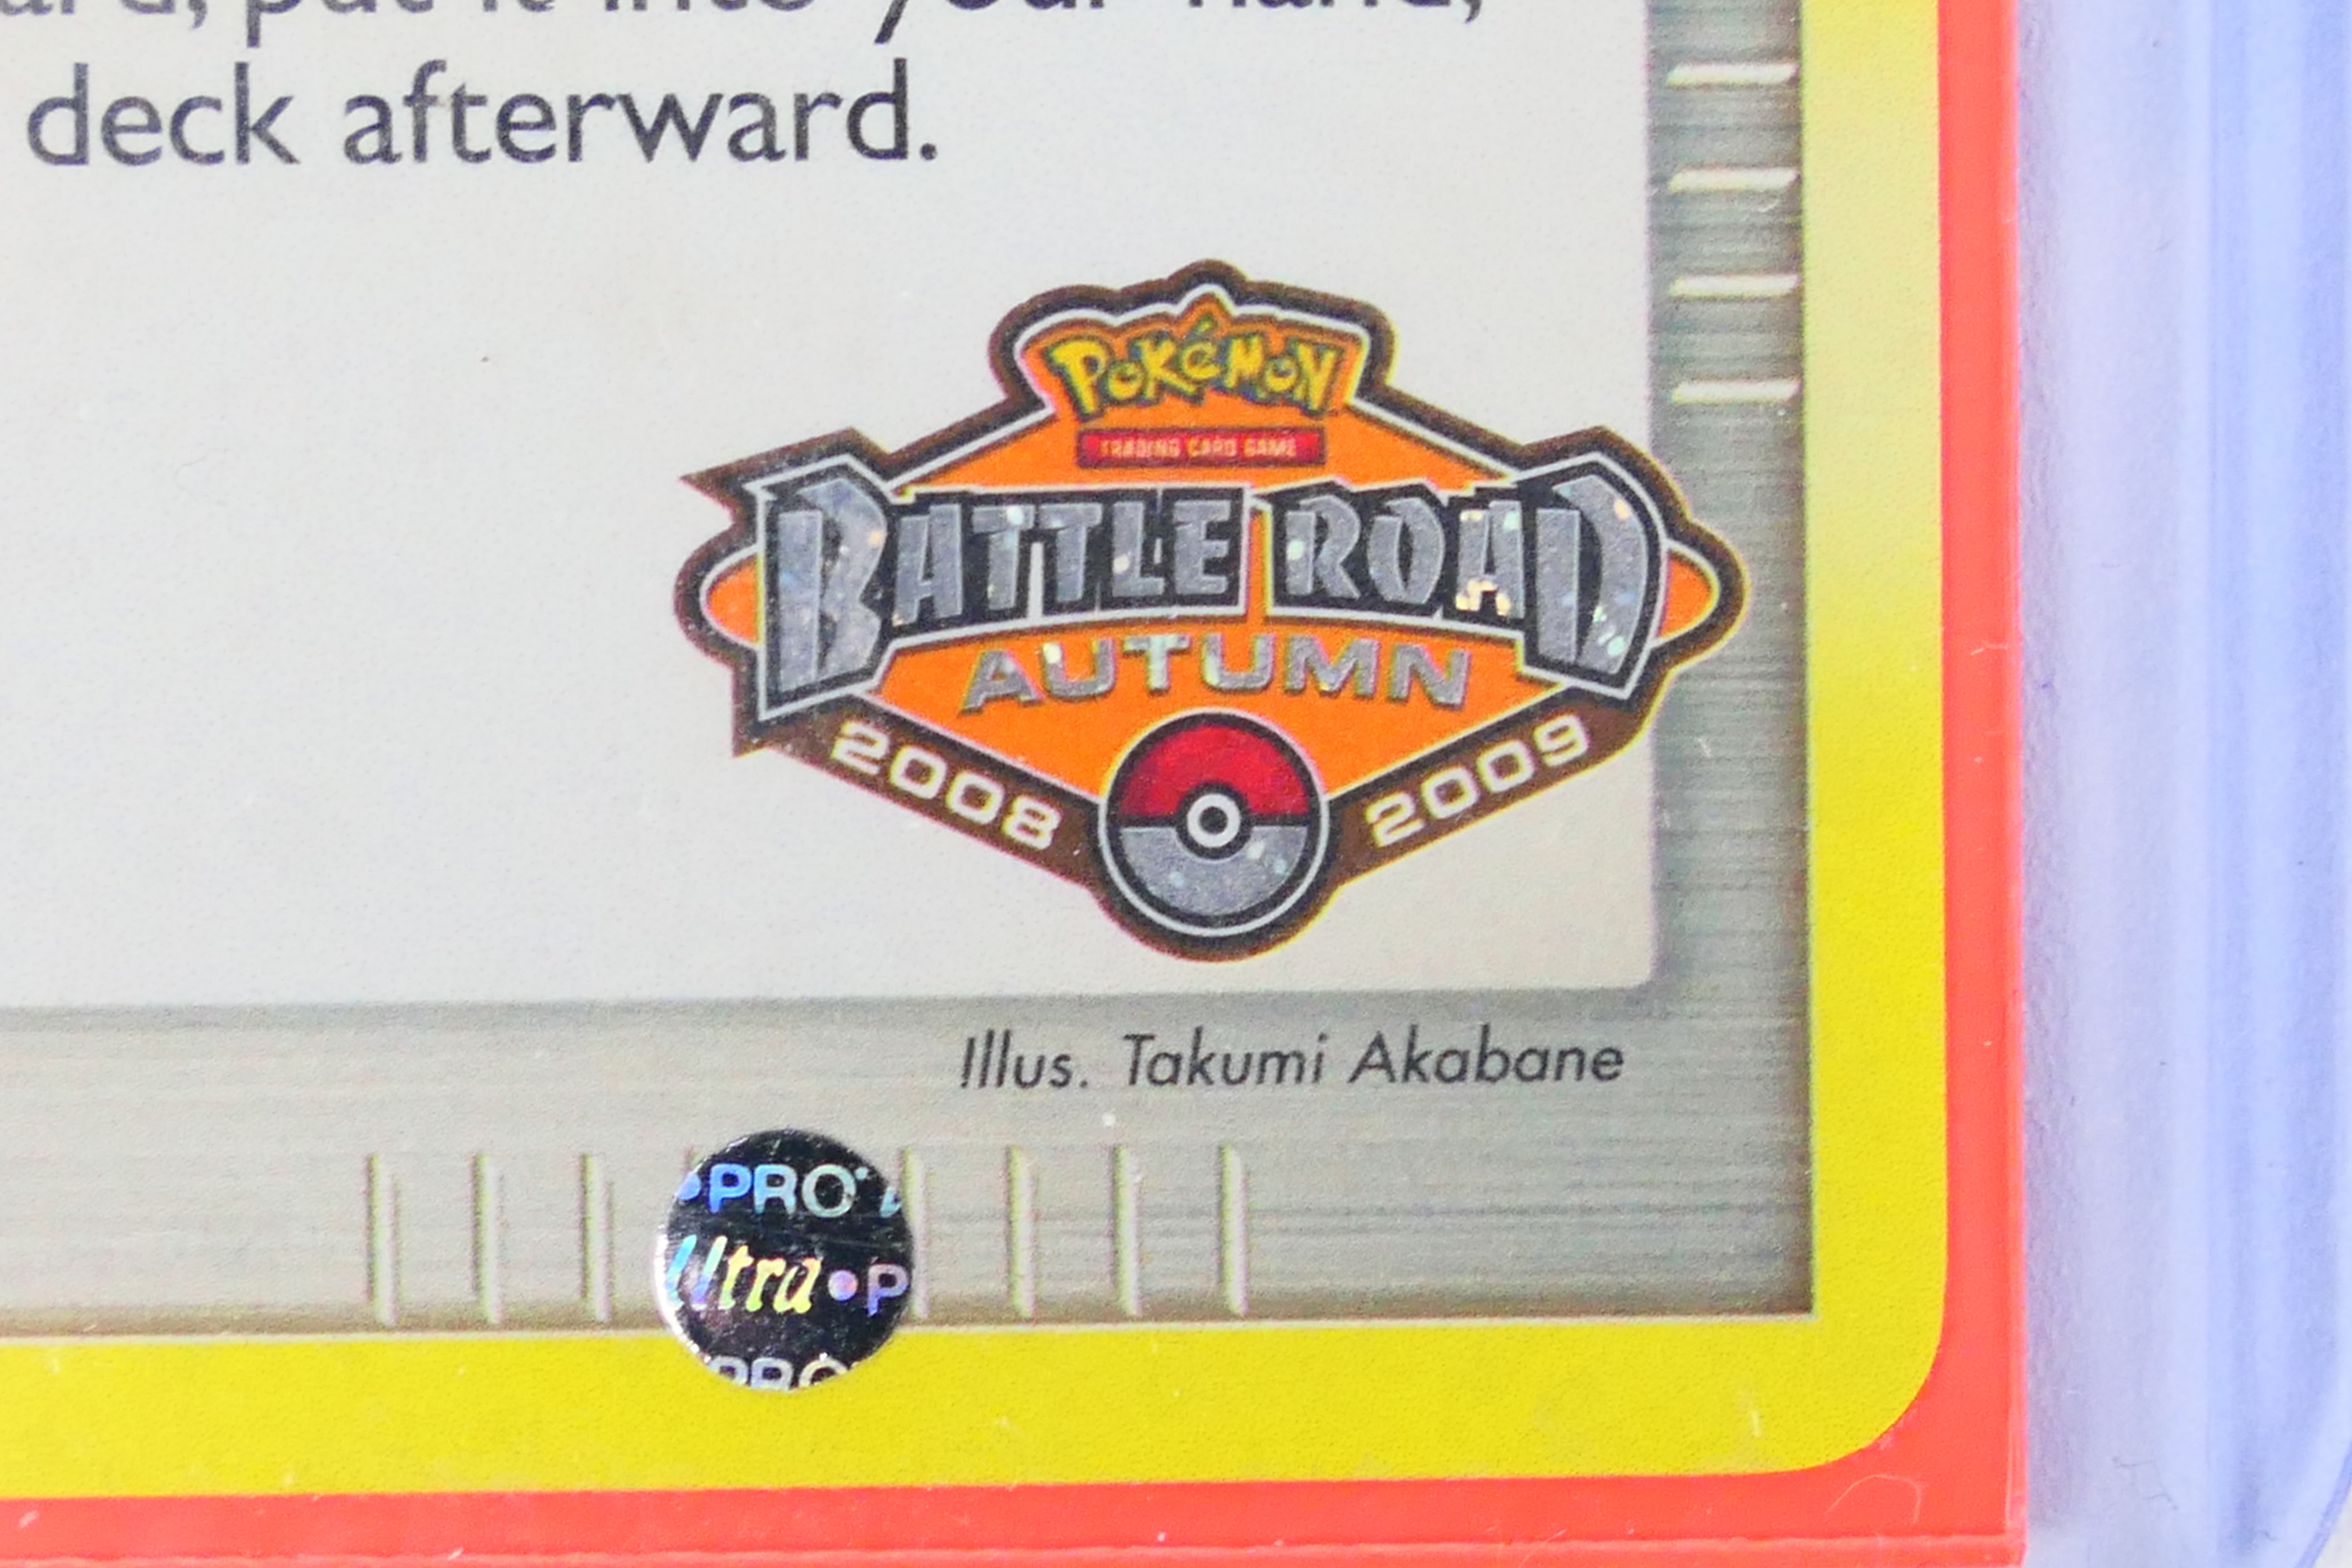 Pokemon - A Pokemon Battle Road Victory Medal Trainer Card for Autumn 2008 / 2009, - Image 2 of 5